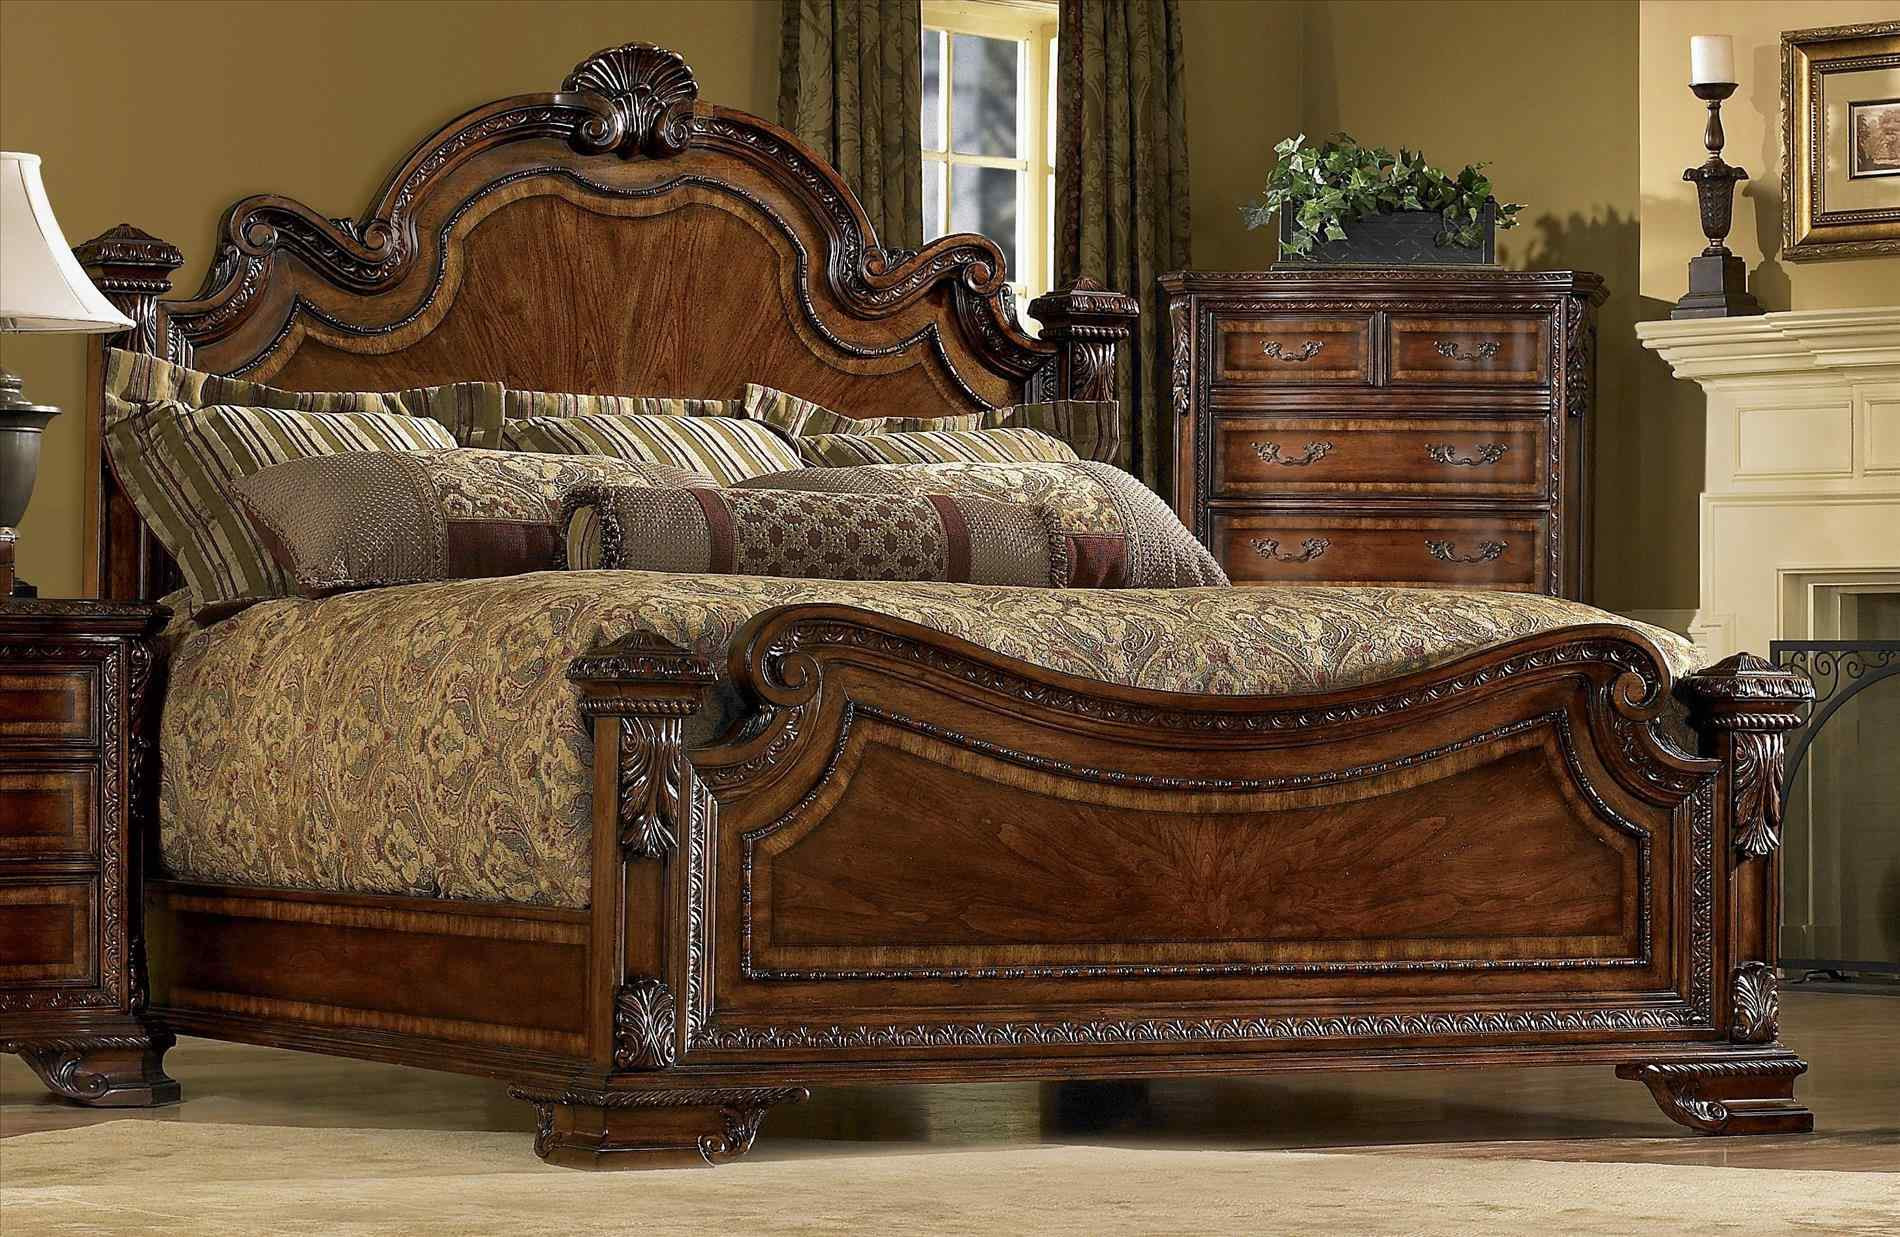 Excellent Bedrooms with Vintage touch Rhtwplayerinfo Tuscan Decor Ideasrhutmebs Tuscan Old